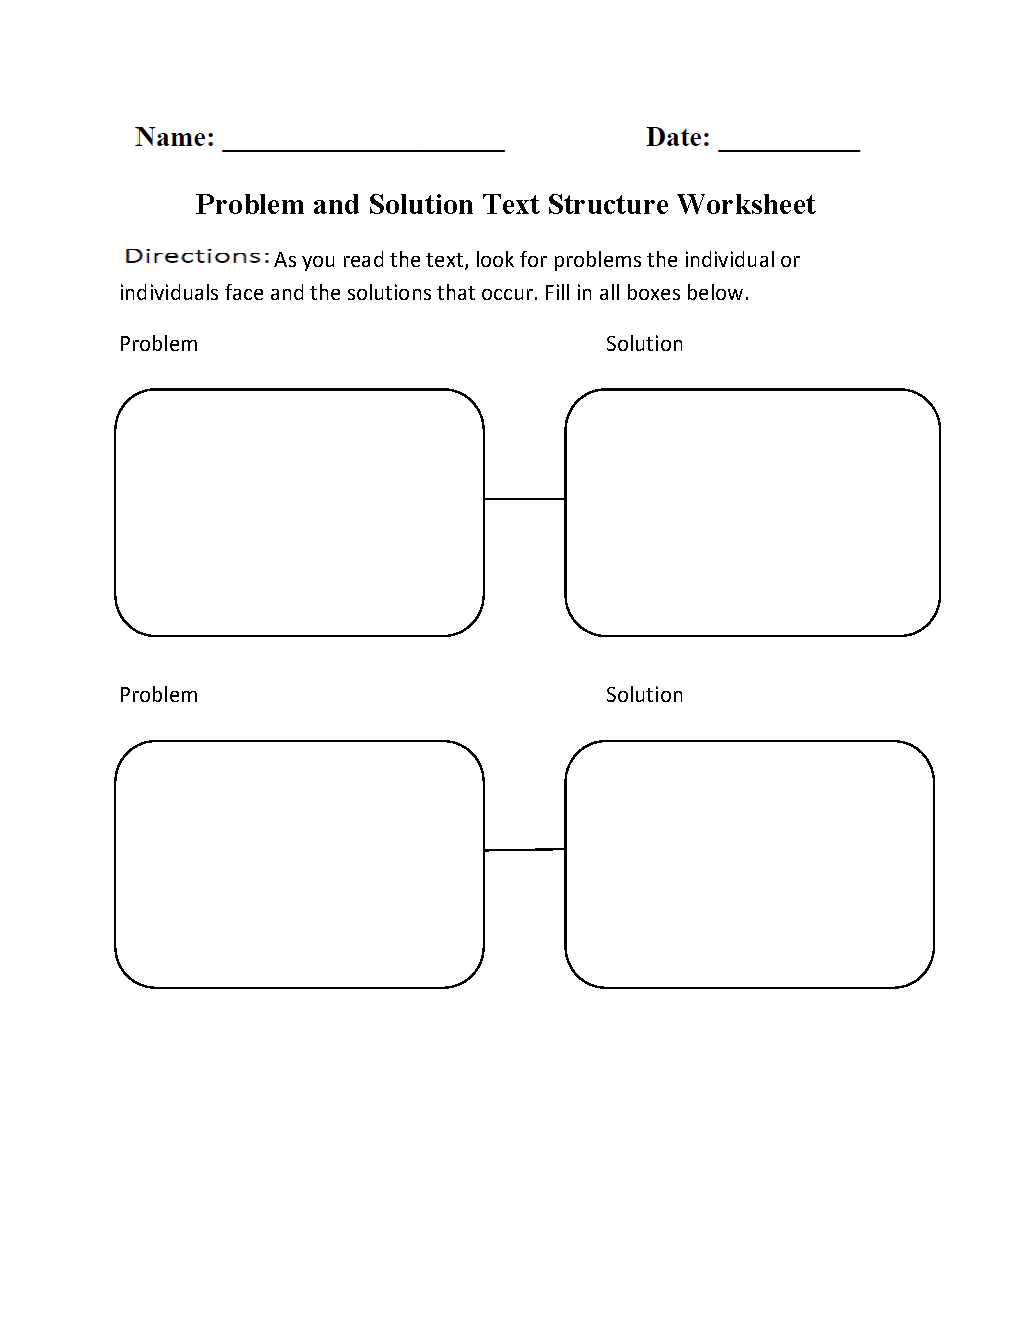 Text Structure Worksheets | Problem and Solution Text Structure Worksheets